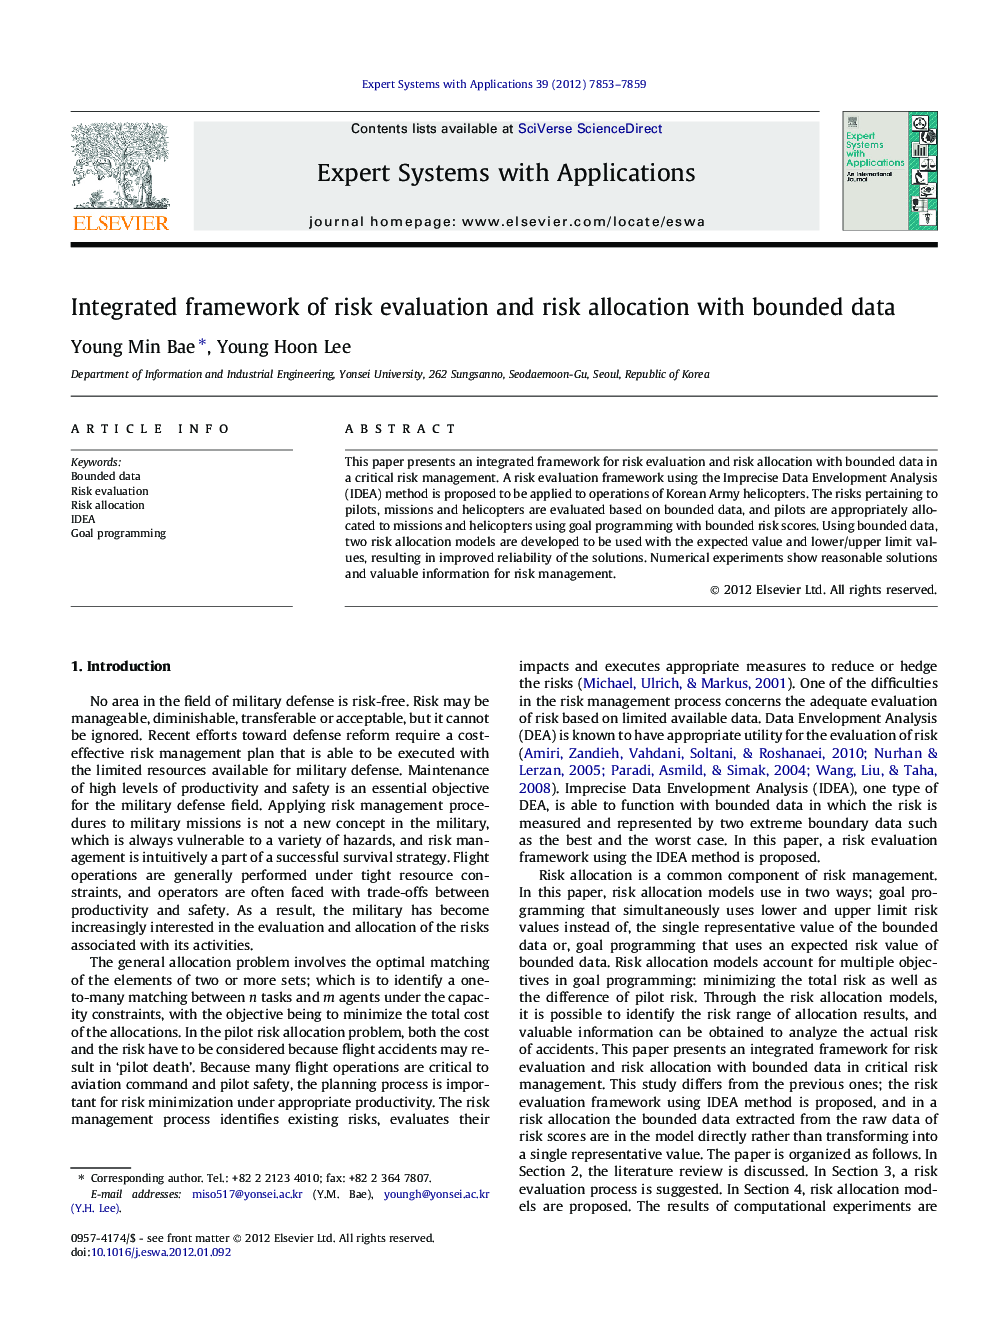 Integrated framework of risk evaluation and risk allocation with bounded data